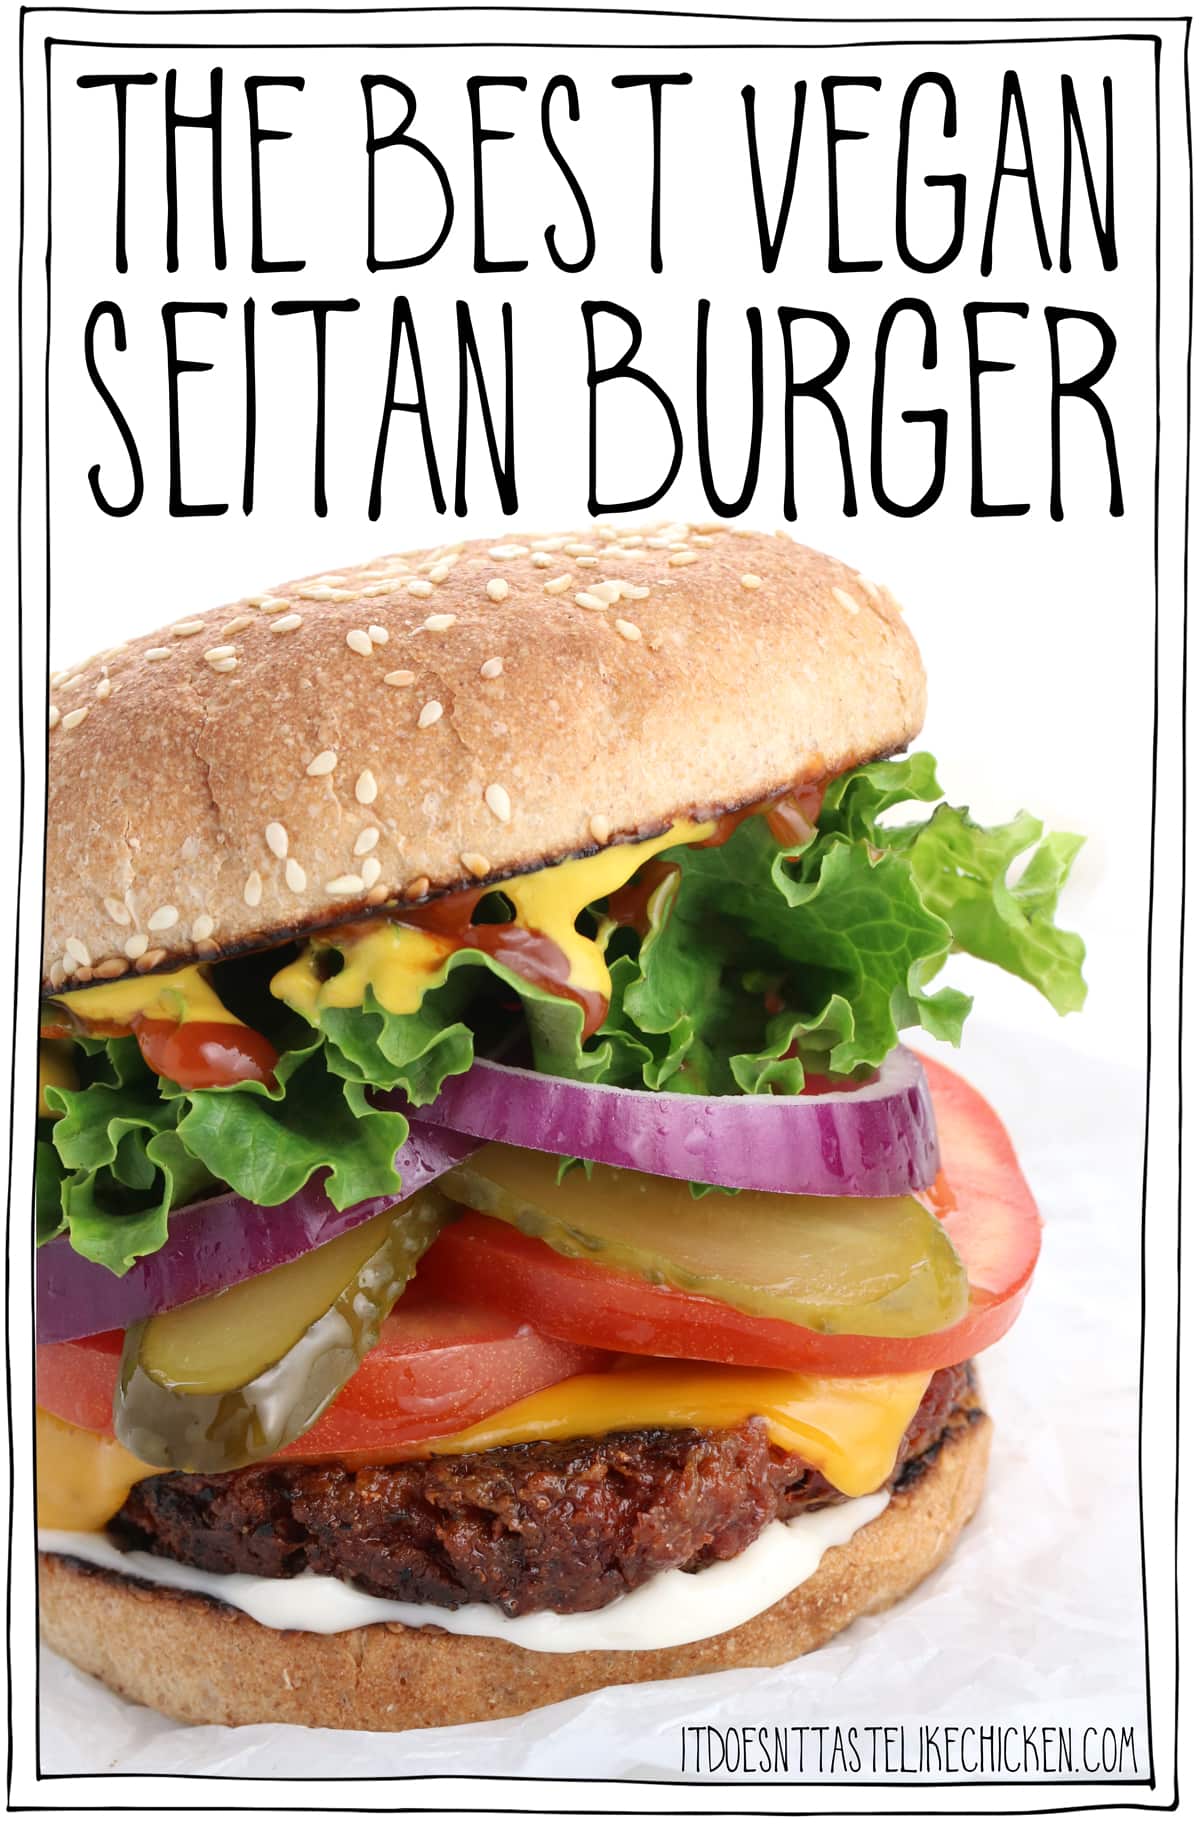 The Best Vegan Seitan Burger! Just 10 ingredients to make the best homemade burger patty ever. Juicy, chewy, meaty, and holds up on the grill! Make these ahead of time and store in the fridge or freezer until ready to serve. Then toss them on the grill or in a frying pan when ready to serve. #itdoesnttastelikechicken #veganrecipes #veggieburger